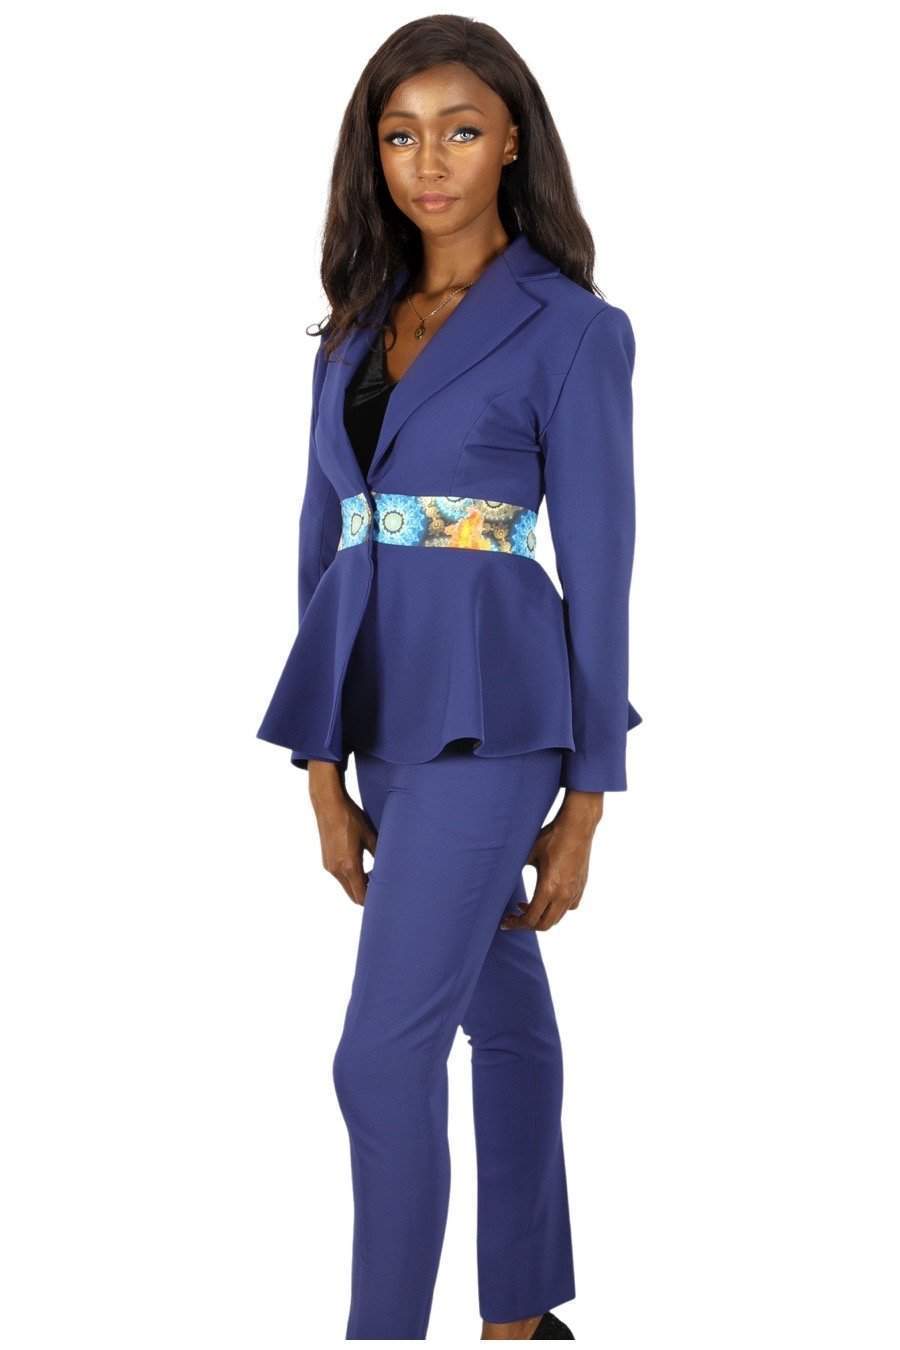 African stylish wolf print Blue Jacket-AFRICAN WEAR FOR WOMEN,Blue,Jackets,Women Jackets